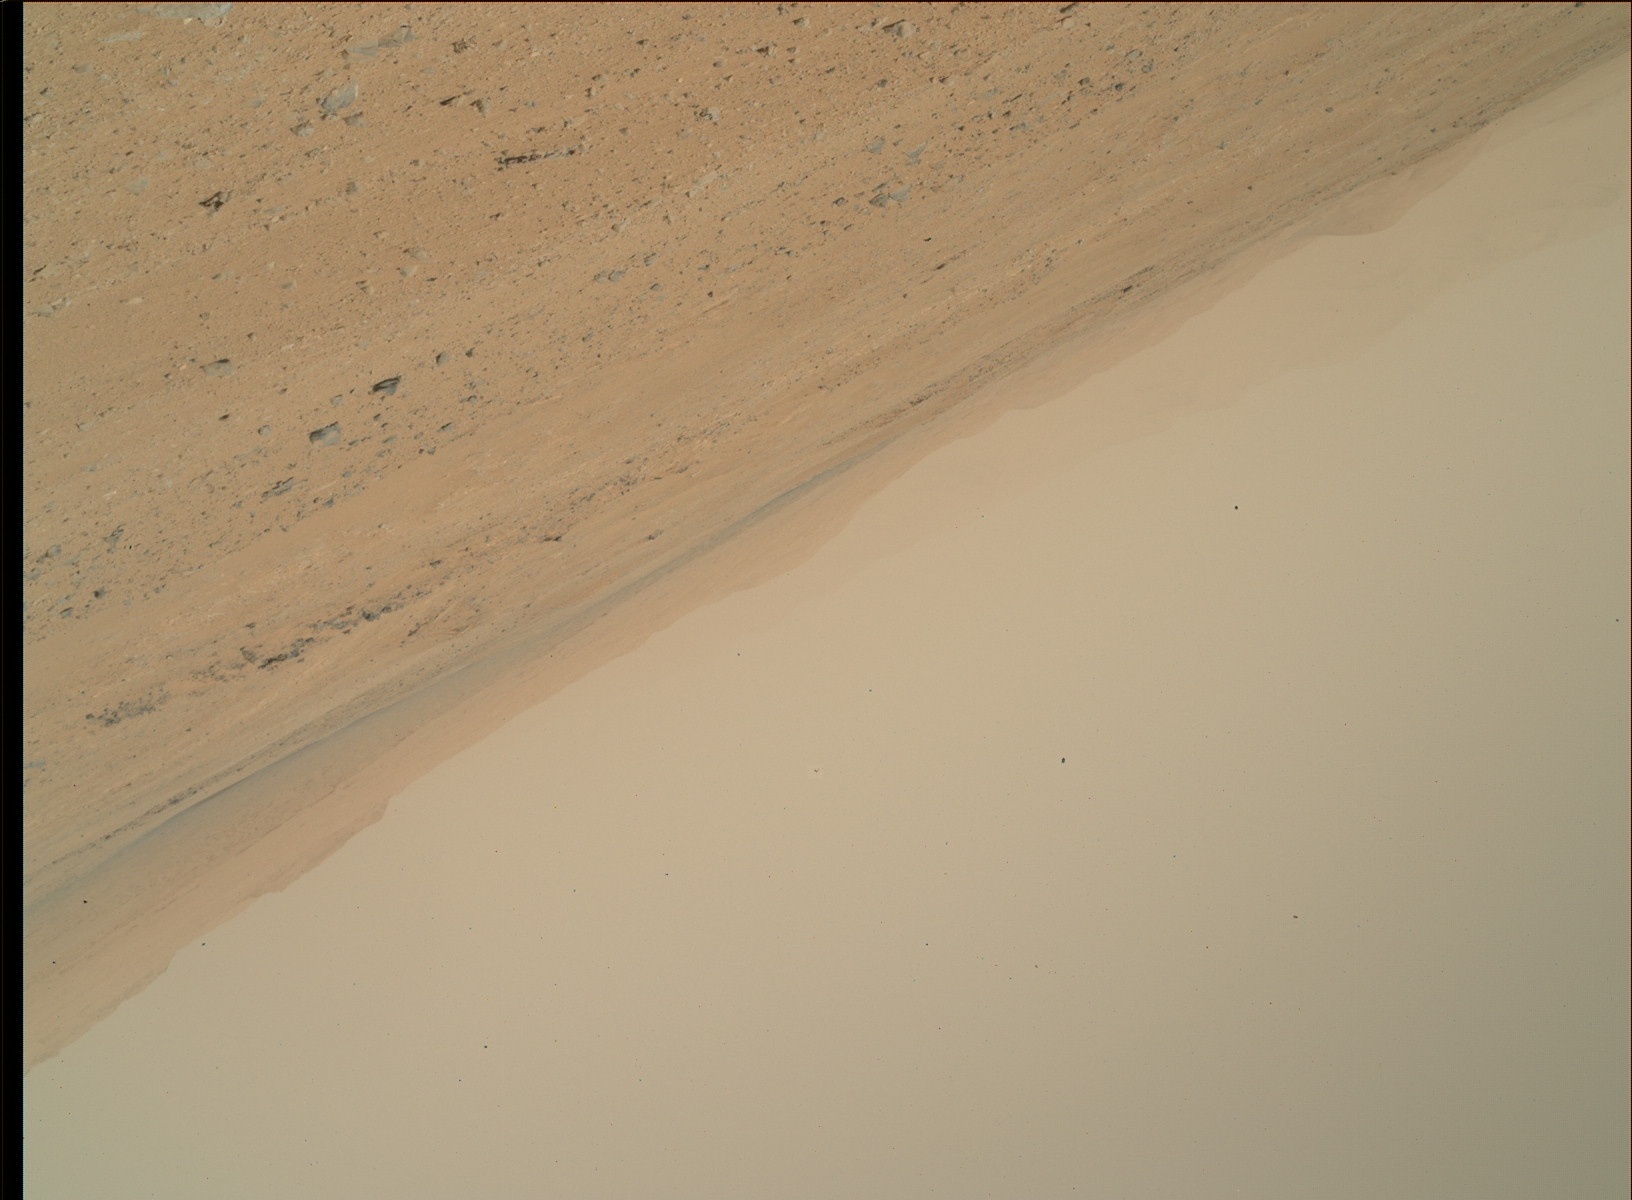 Nasa's Mars rover Curiosity acquired this image using its Mars Hand Lens Imager (MAHLI) on Sol 385